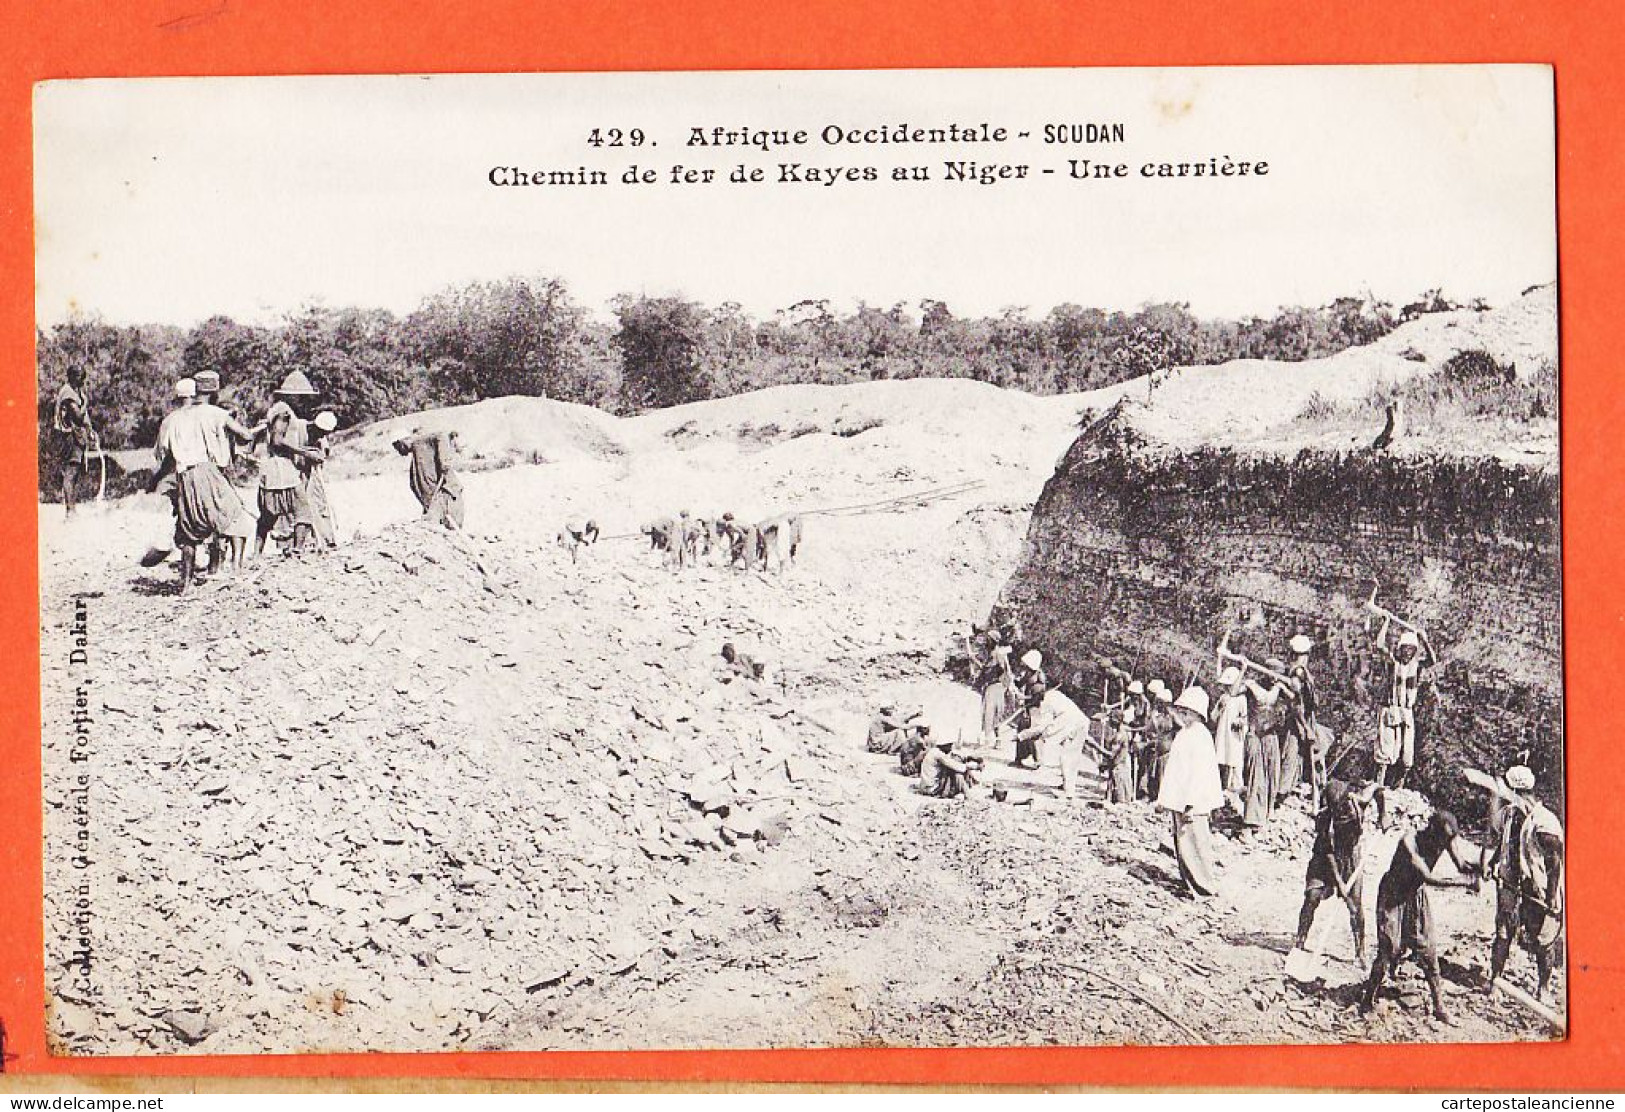 32995 / ⭐ (•◡•) Chemin Fer KAYES Au NIGER Soudan ◉ Une Carriere 1905s ◉ Collection Generale FORTIER 429 Dakar A.O.F - Soudan